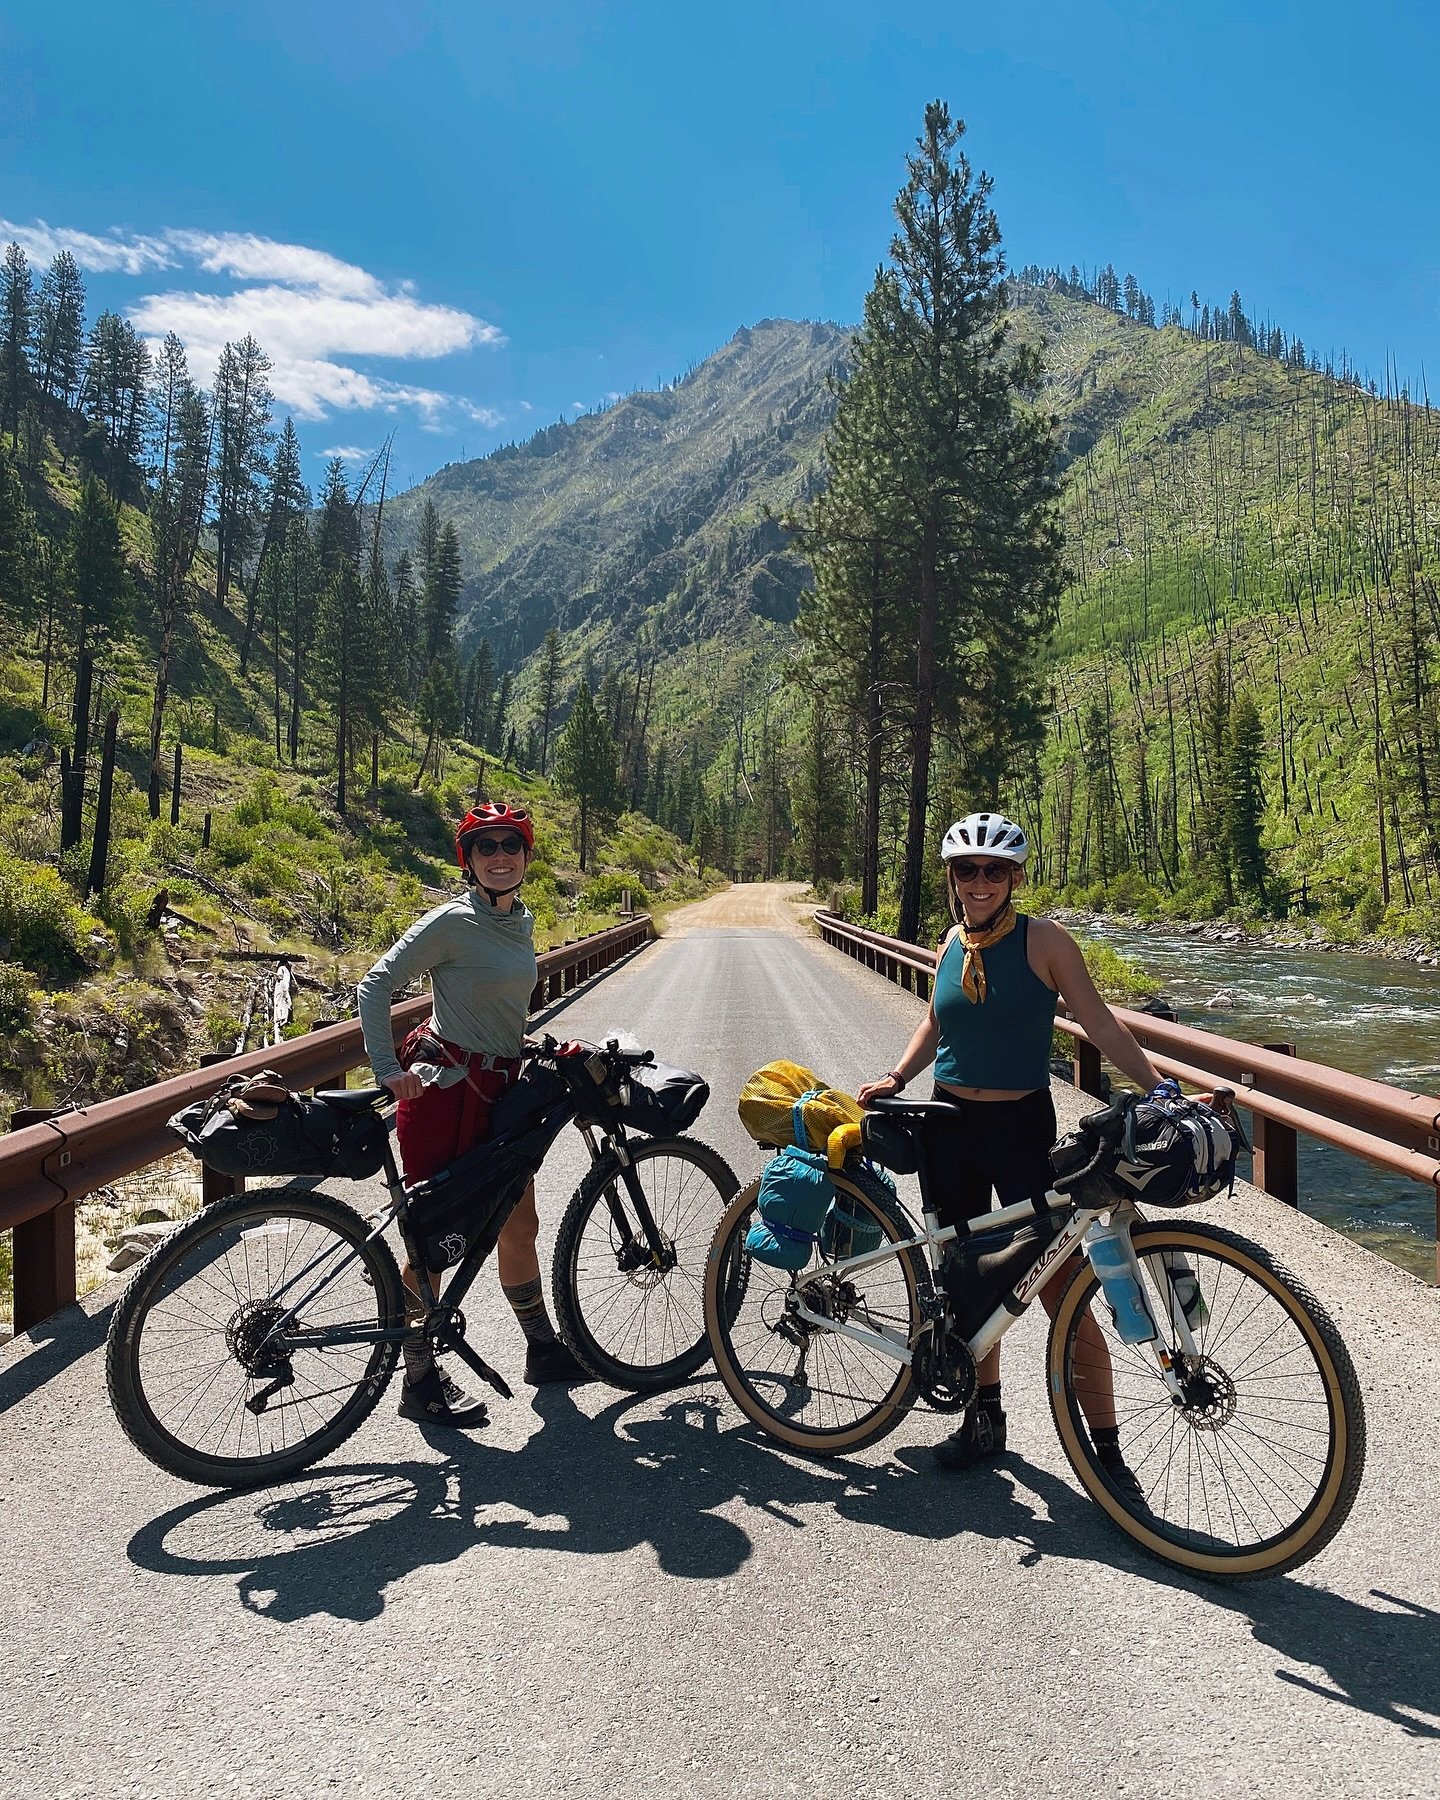 Happy Earth Day to our bicycling community!🌍

For those of you who love to exlpore our backroads via bike, we&rsquo;ve got a clinic coming up for you. On Tuesday, May 7th, Boise Bicycle Project and Idaho Women&rsquo;s Bikepacking (@idahowomensbikepa